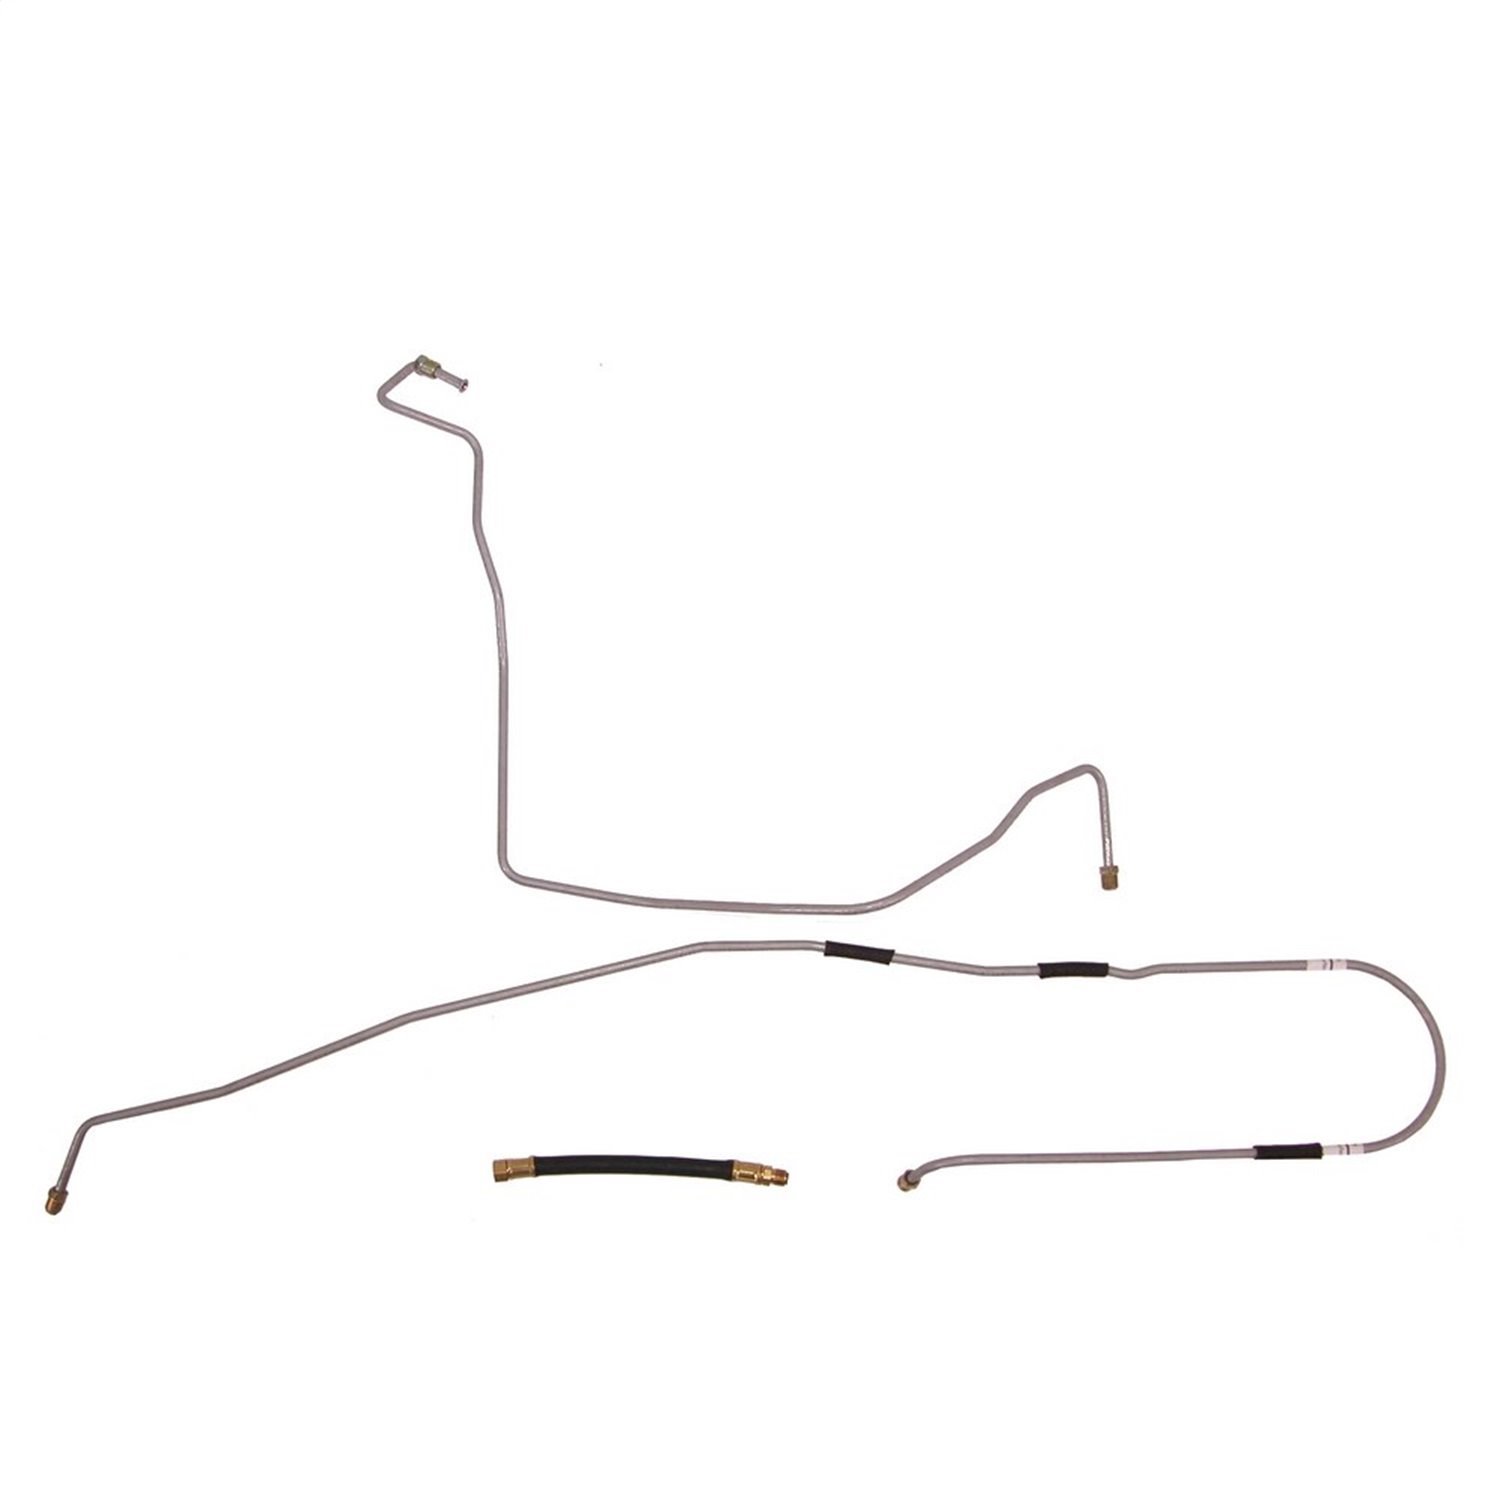 Replacement fuel line set from Omix-ADA, Fits 55-66 Jeep CJ5 with a 134 cubic inch engine.